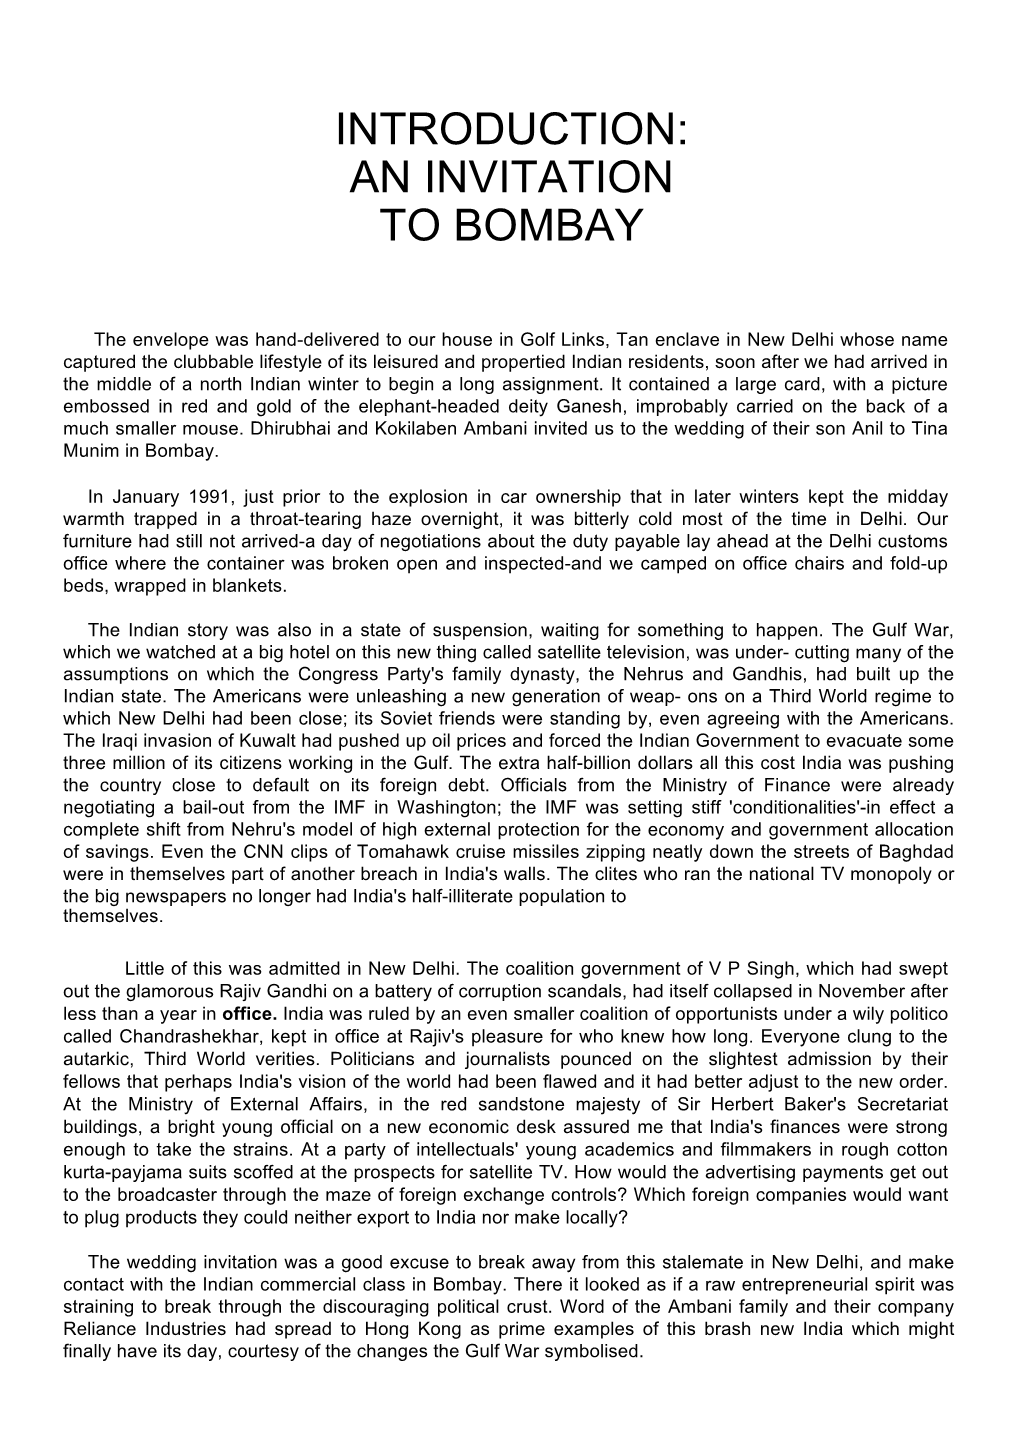 Introduction: an Invitation to Bombay